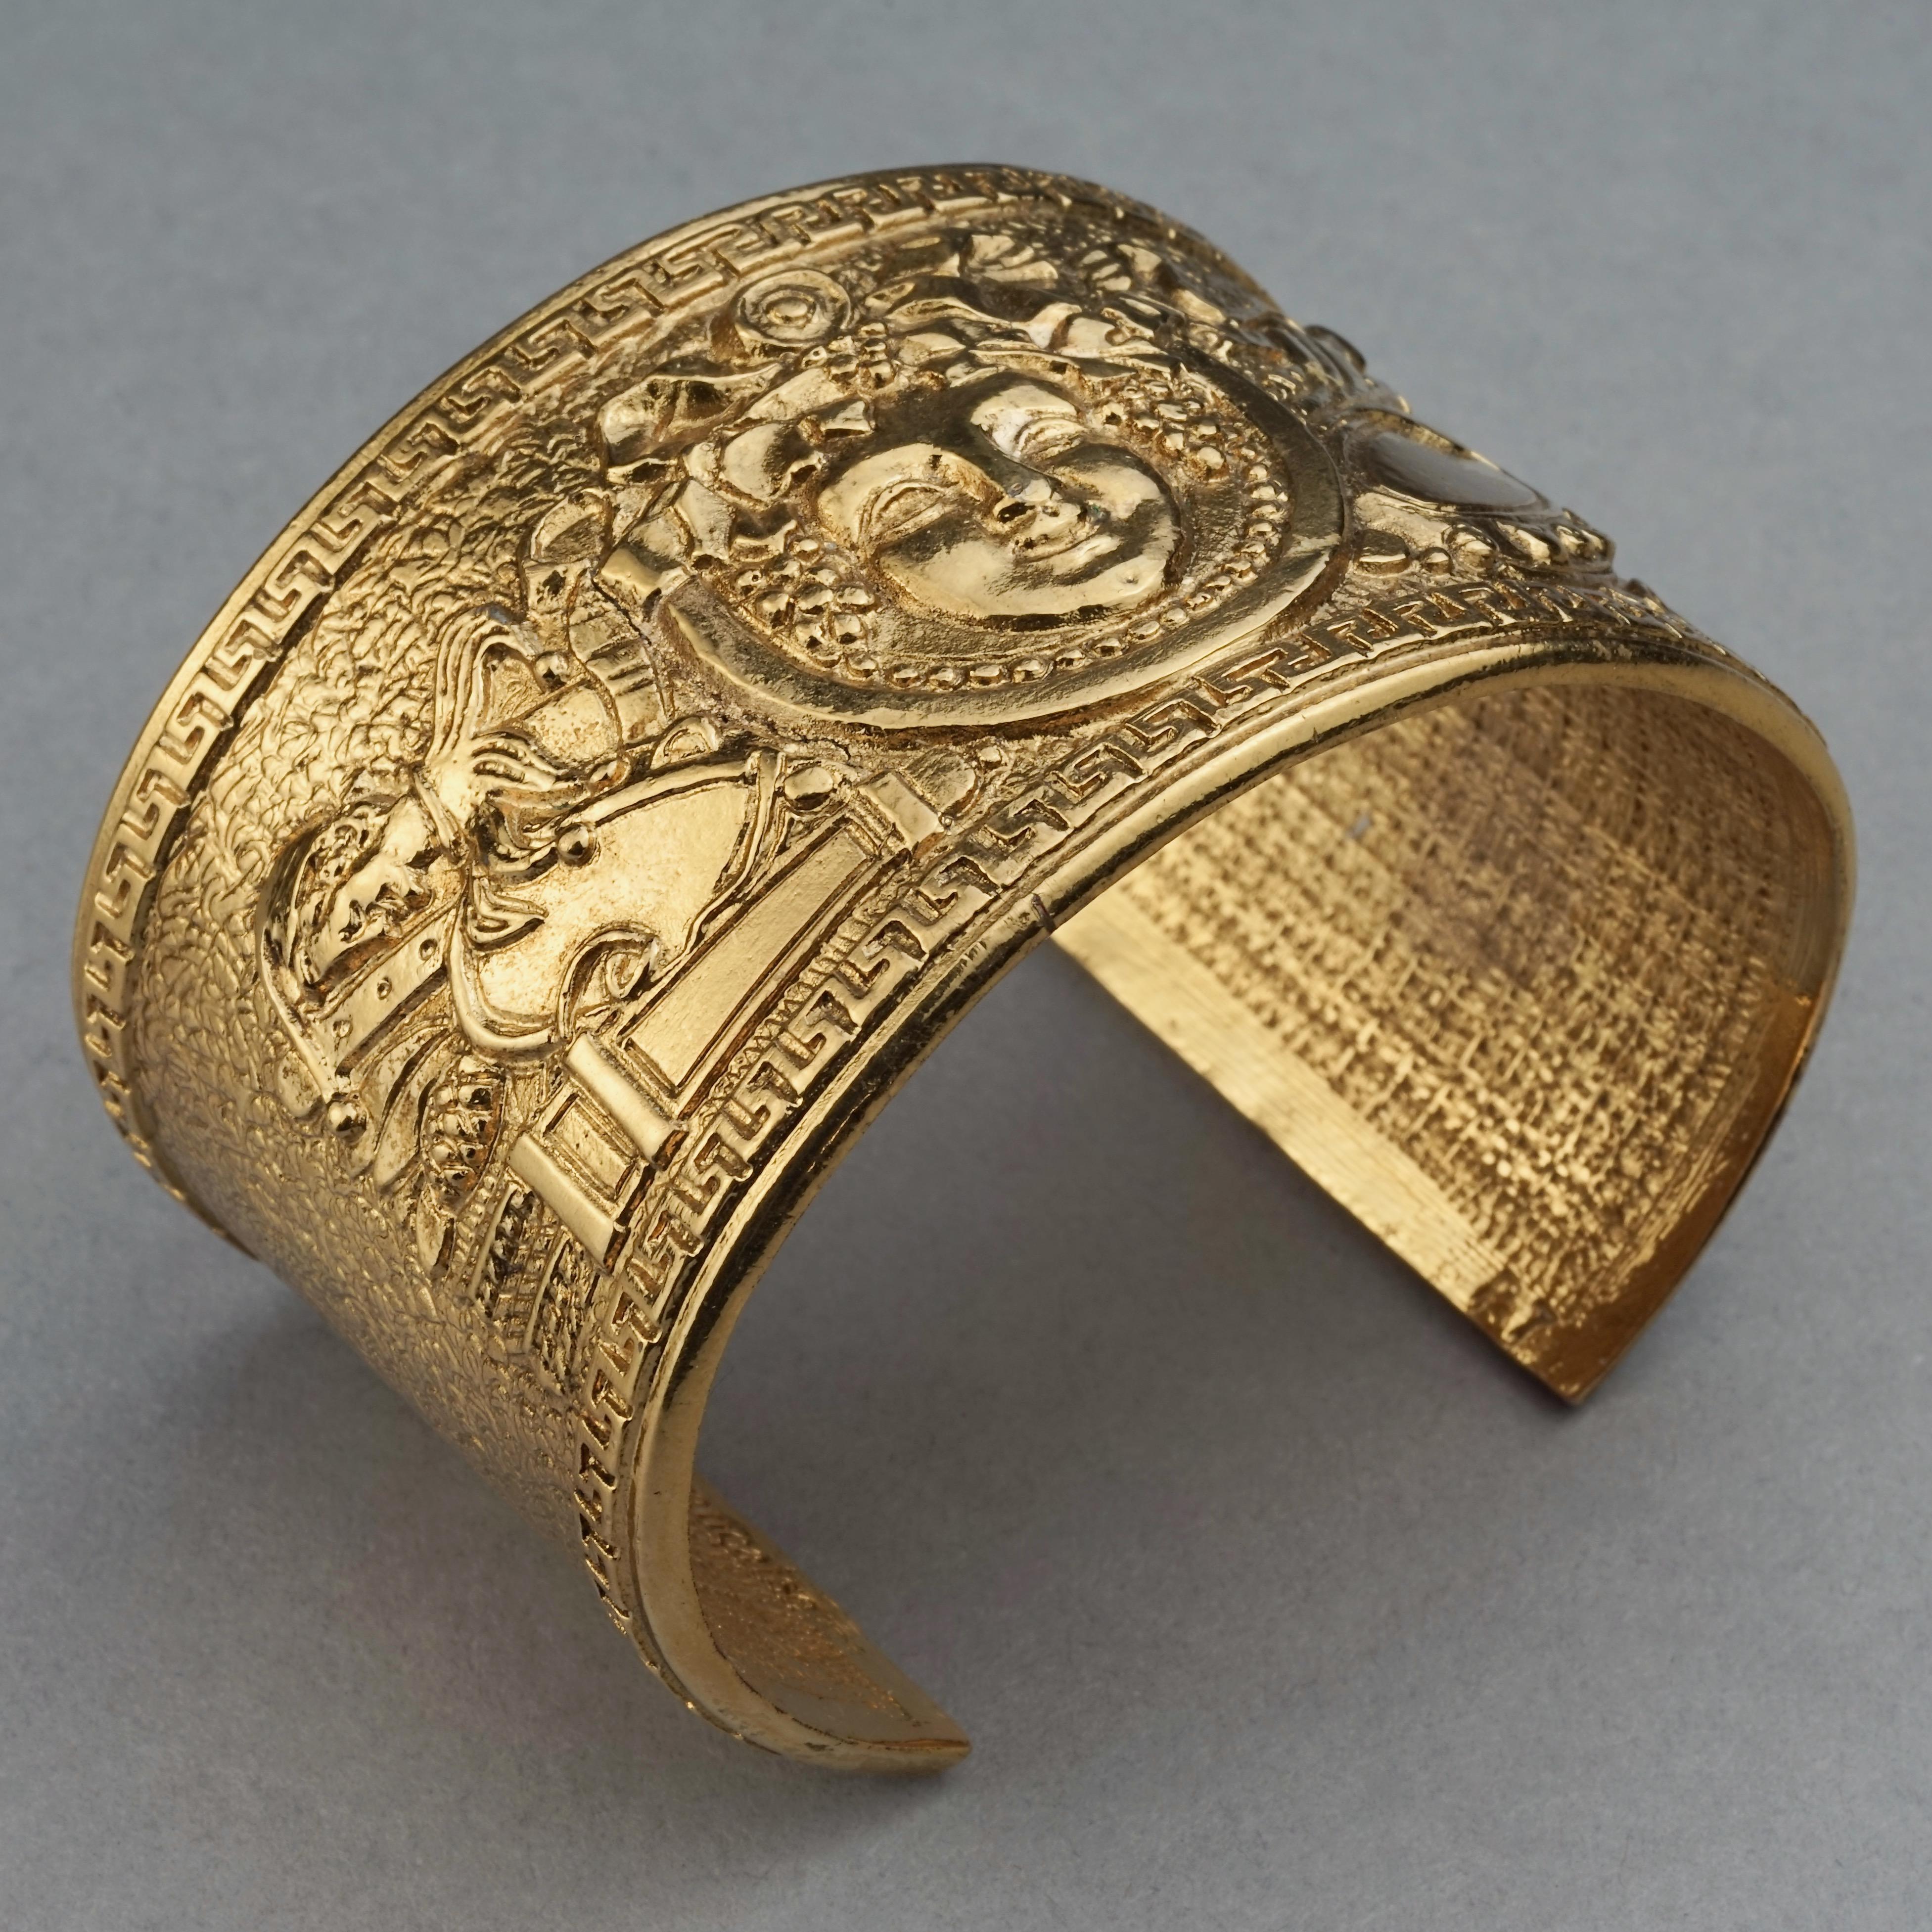 COMEDIE FRANCAISE Bacchus Figural Cuff Bracelet Attributed to Christian Lacroix  In Good Condition For Sale In Kingersheim, Alsace